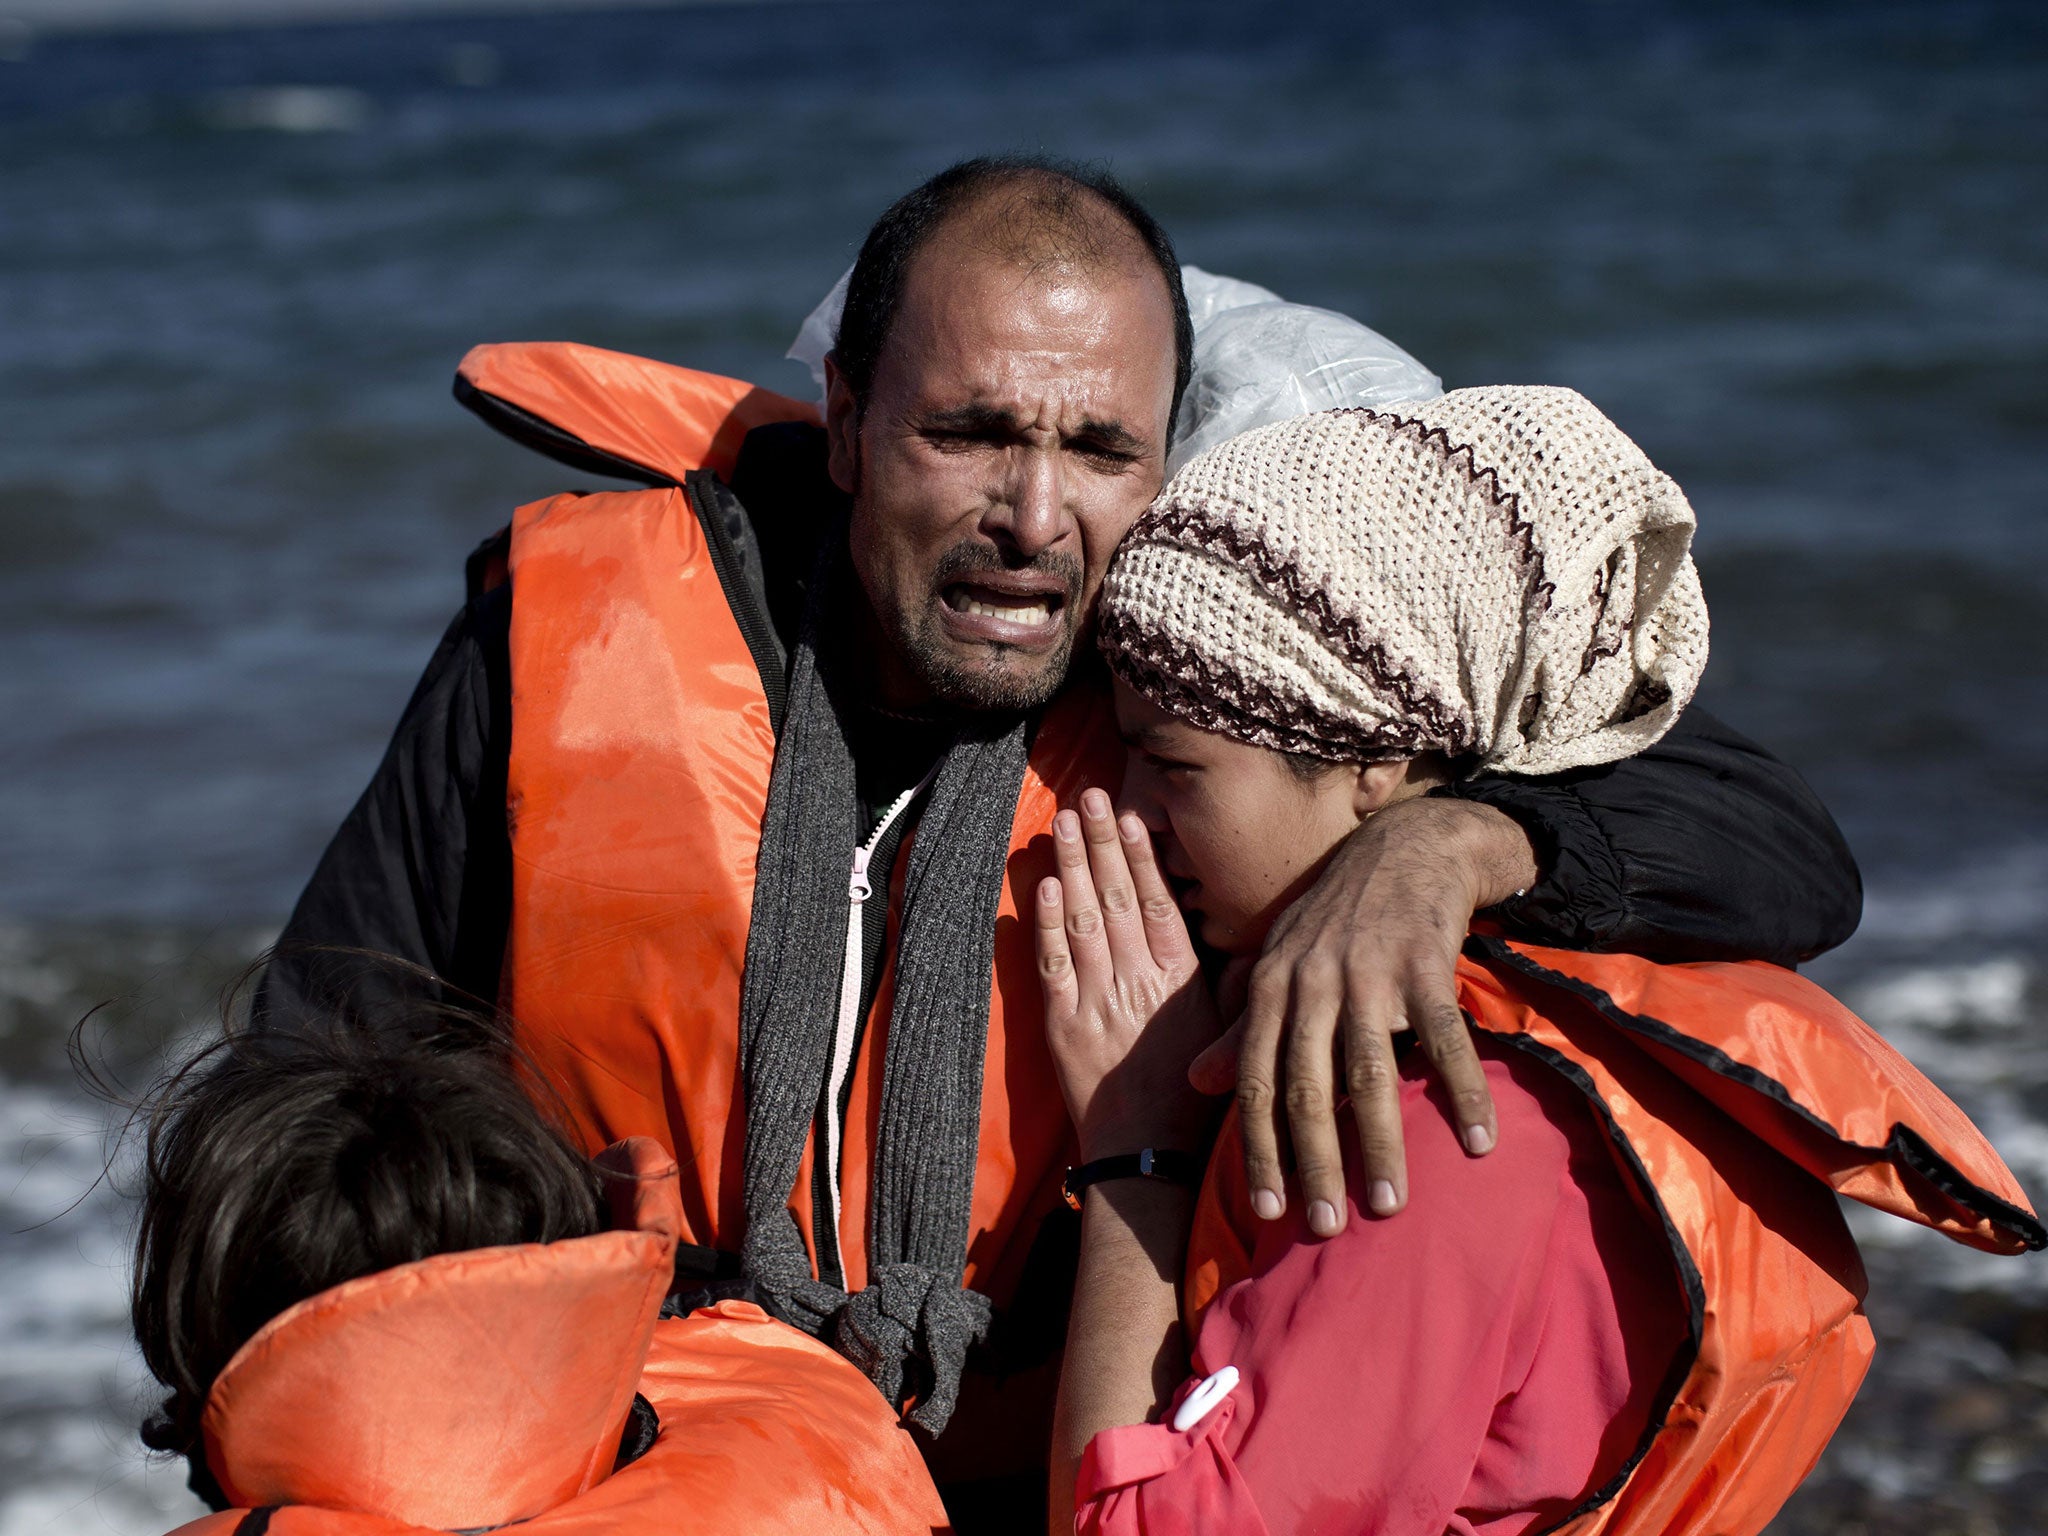 A family reacts after arriving, with other refugees and migrants, on the Greek island of Lesbos, on October 28, 2015,